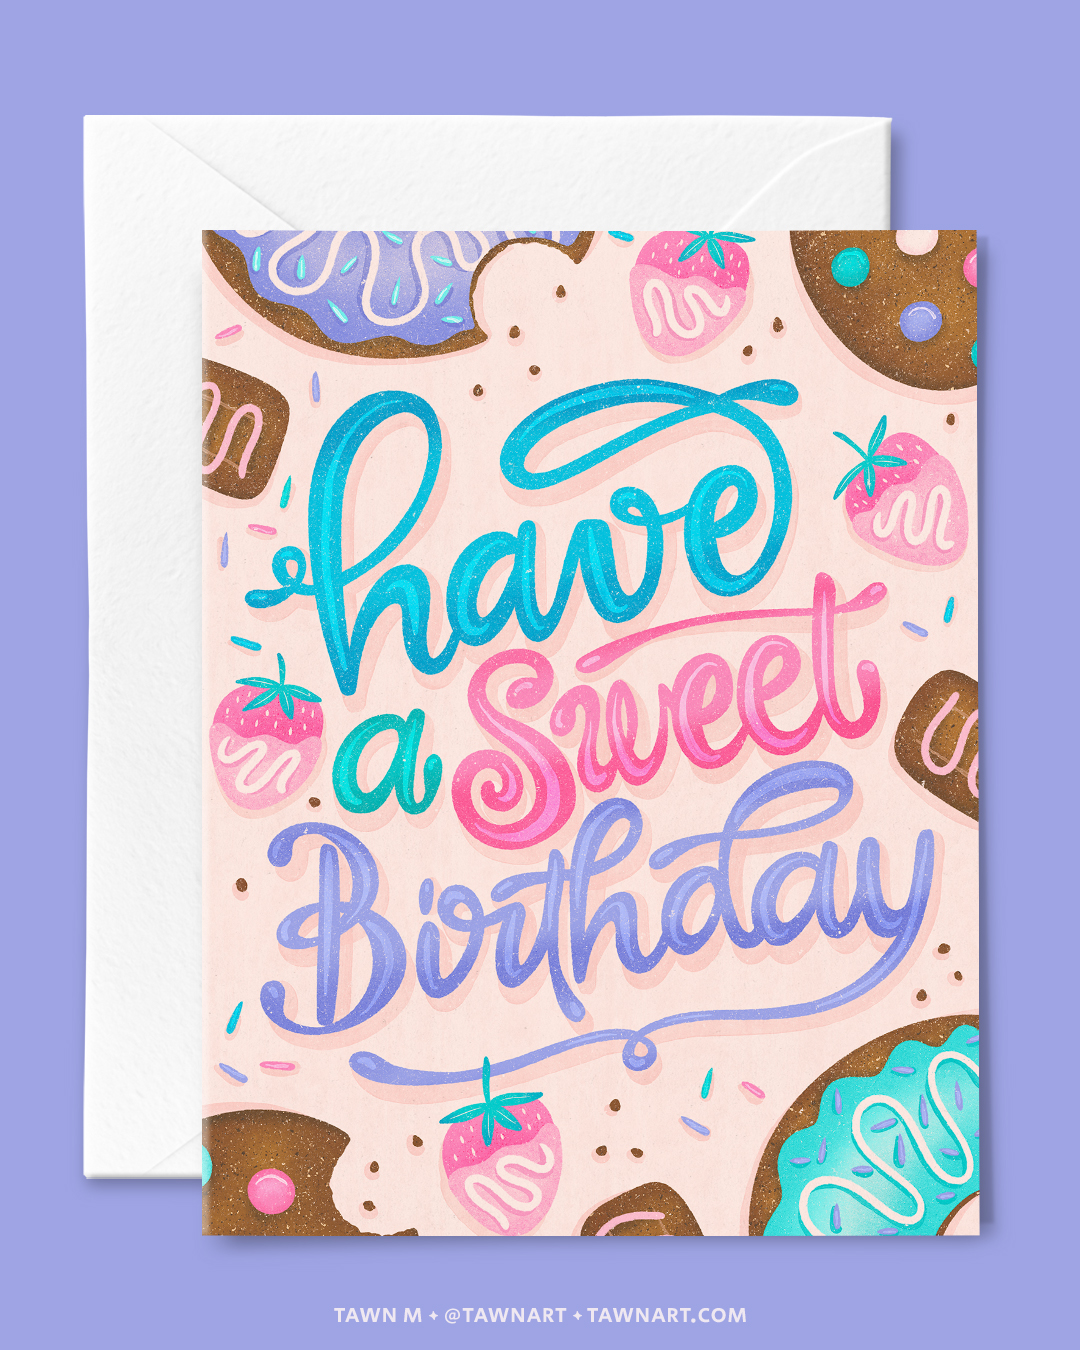 Birthday card with donuts, cookies, strawberries, and chocolates. Caption: Have a sweet birthday.